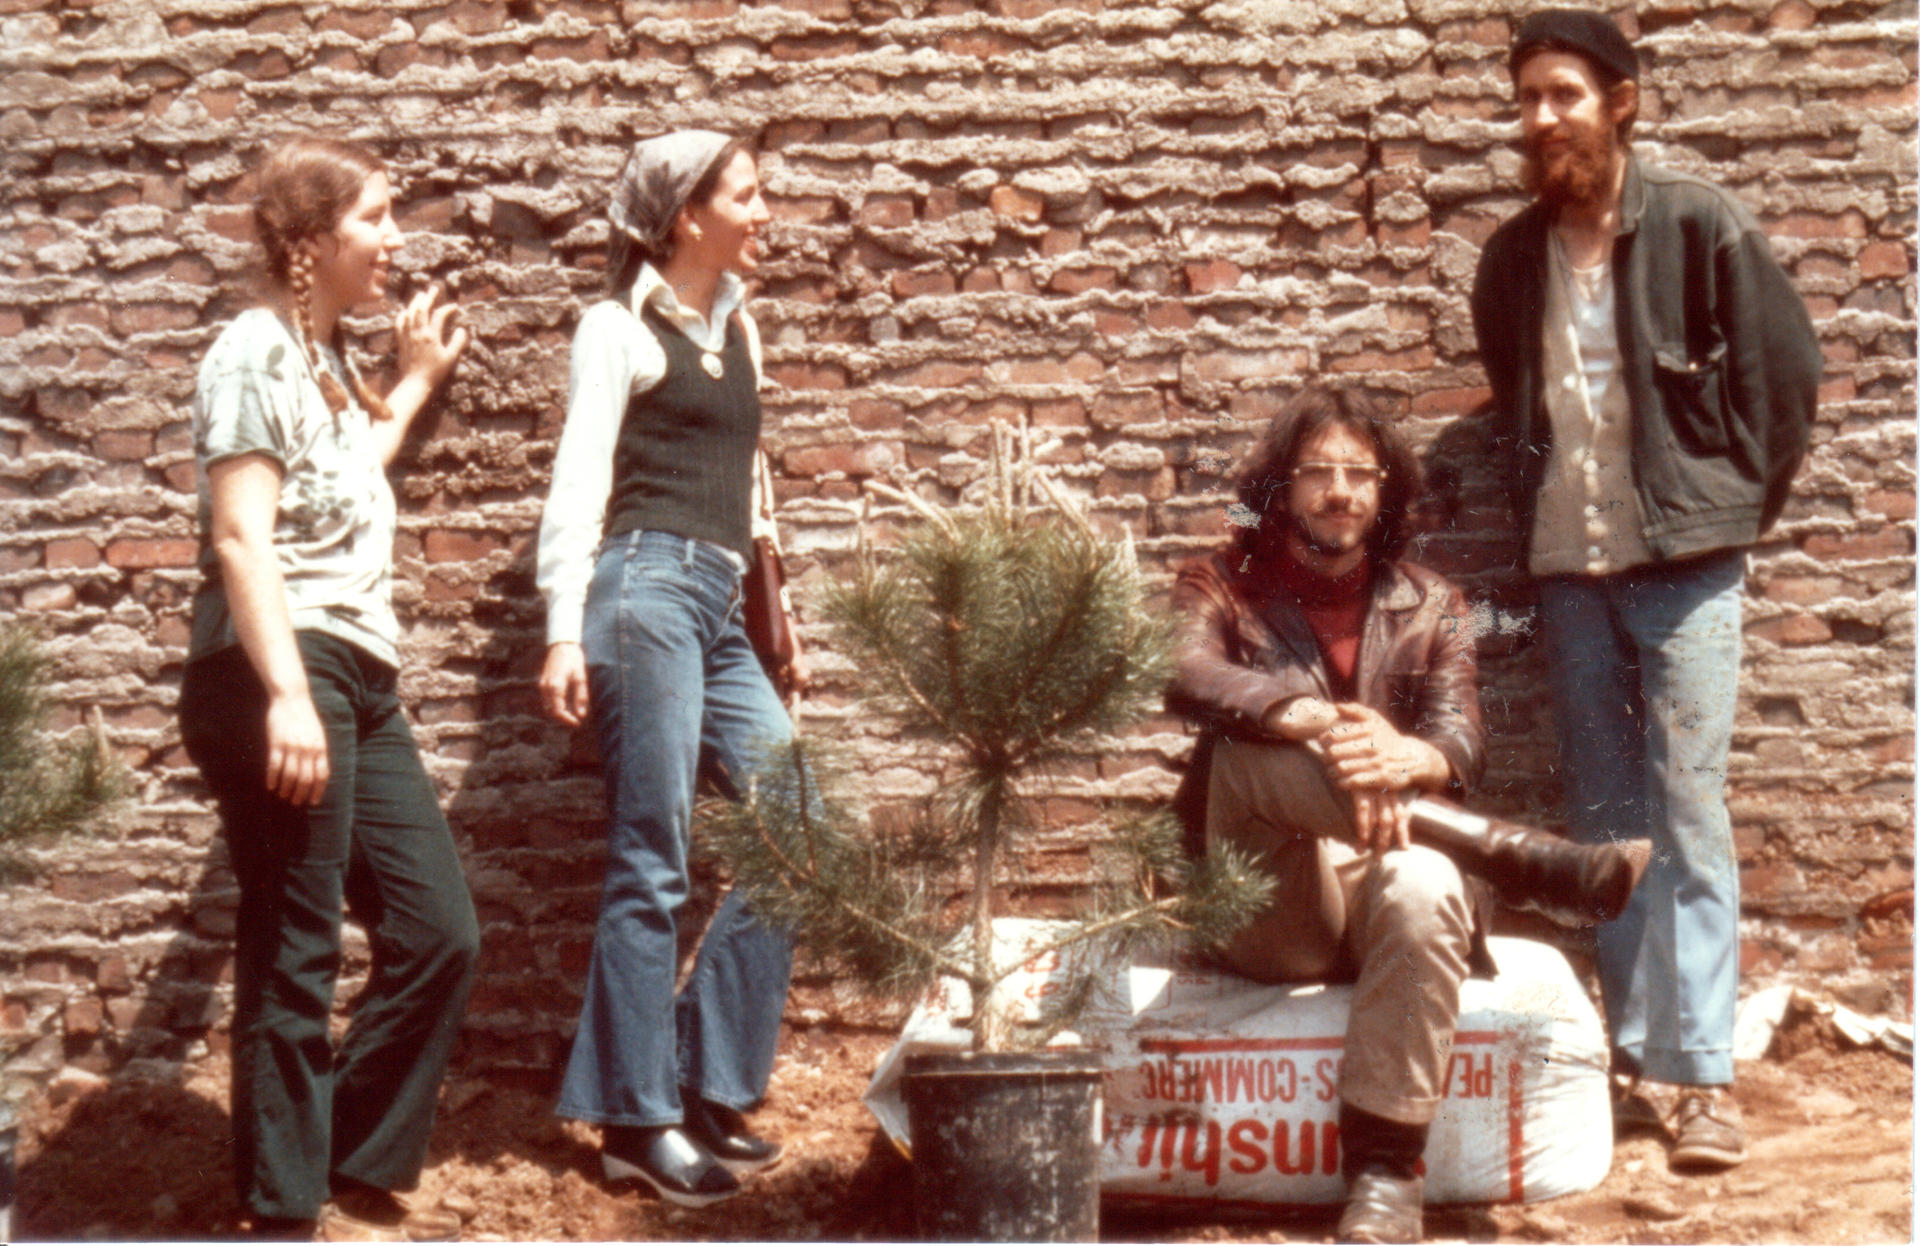 Don Loggins provided this 1974 photograph of members of the Green Guerrillas at a community garden in New York. EFE/Don Loggins